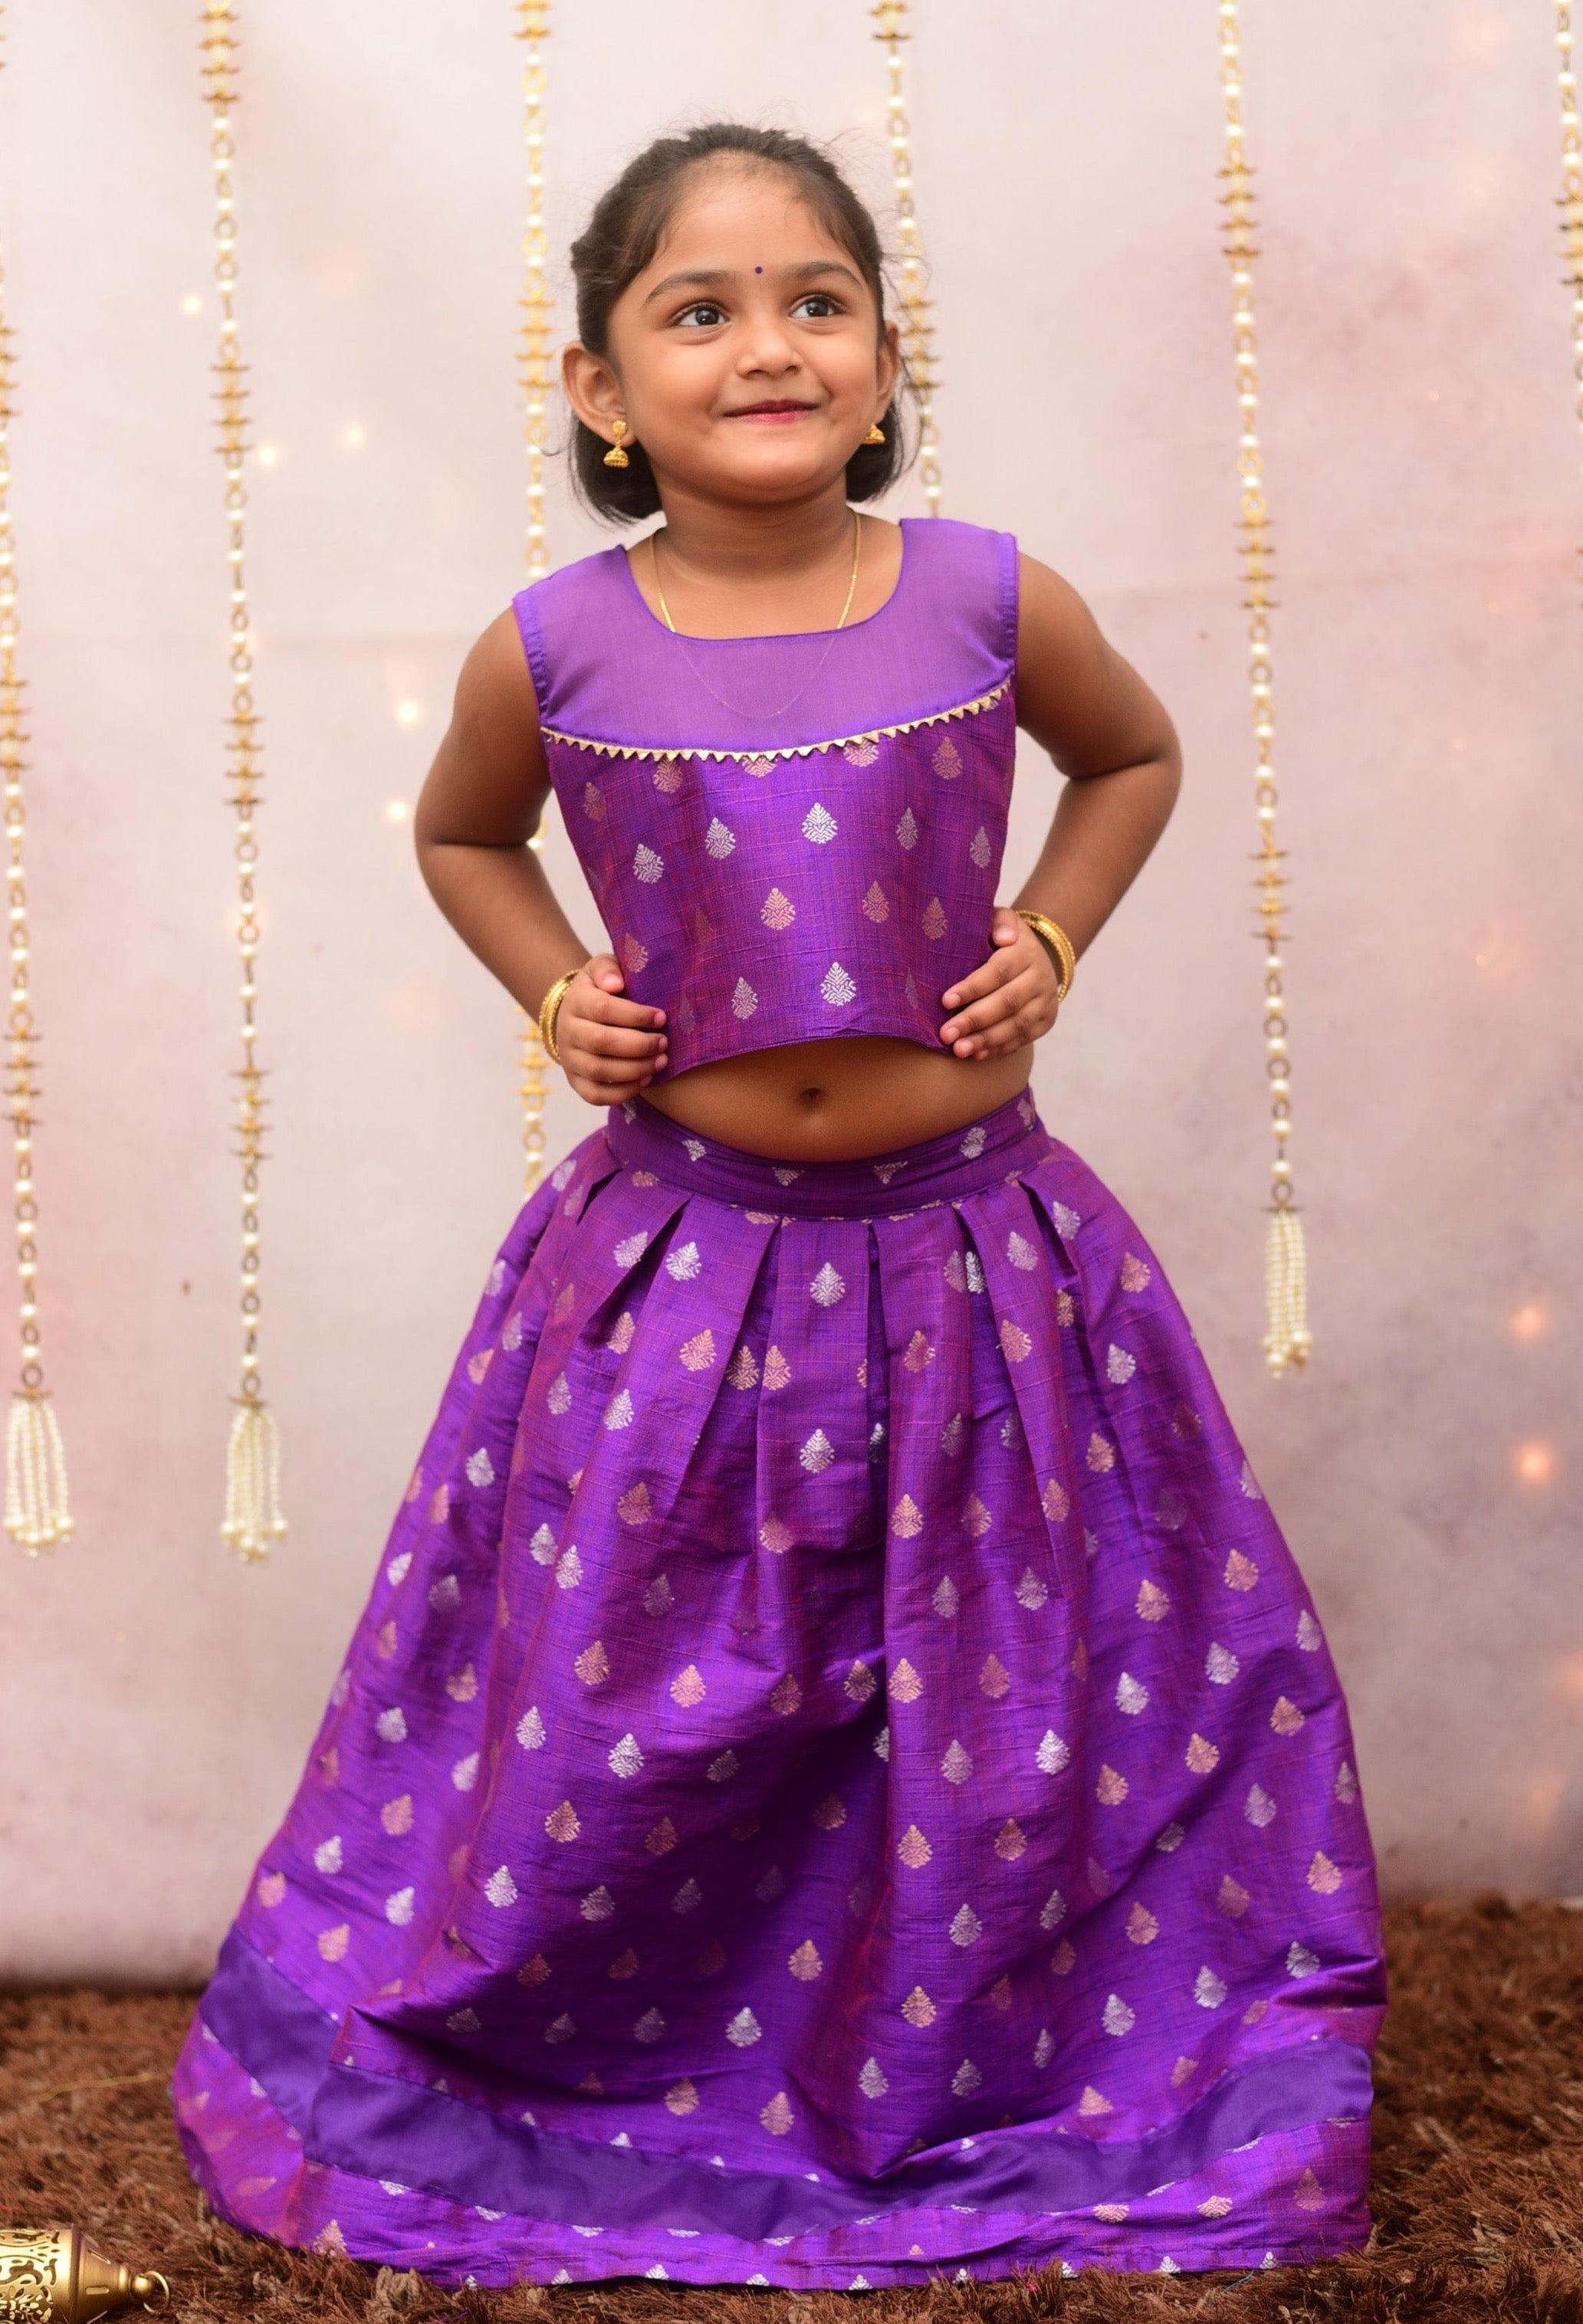 Shop for quality mommy and me Indian dresses for kids. Shop for branded kidswear online, featuring stylish brocade pattu top and skirt sets in vibrant shades of violet with beautiful soft organza borders.